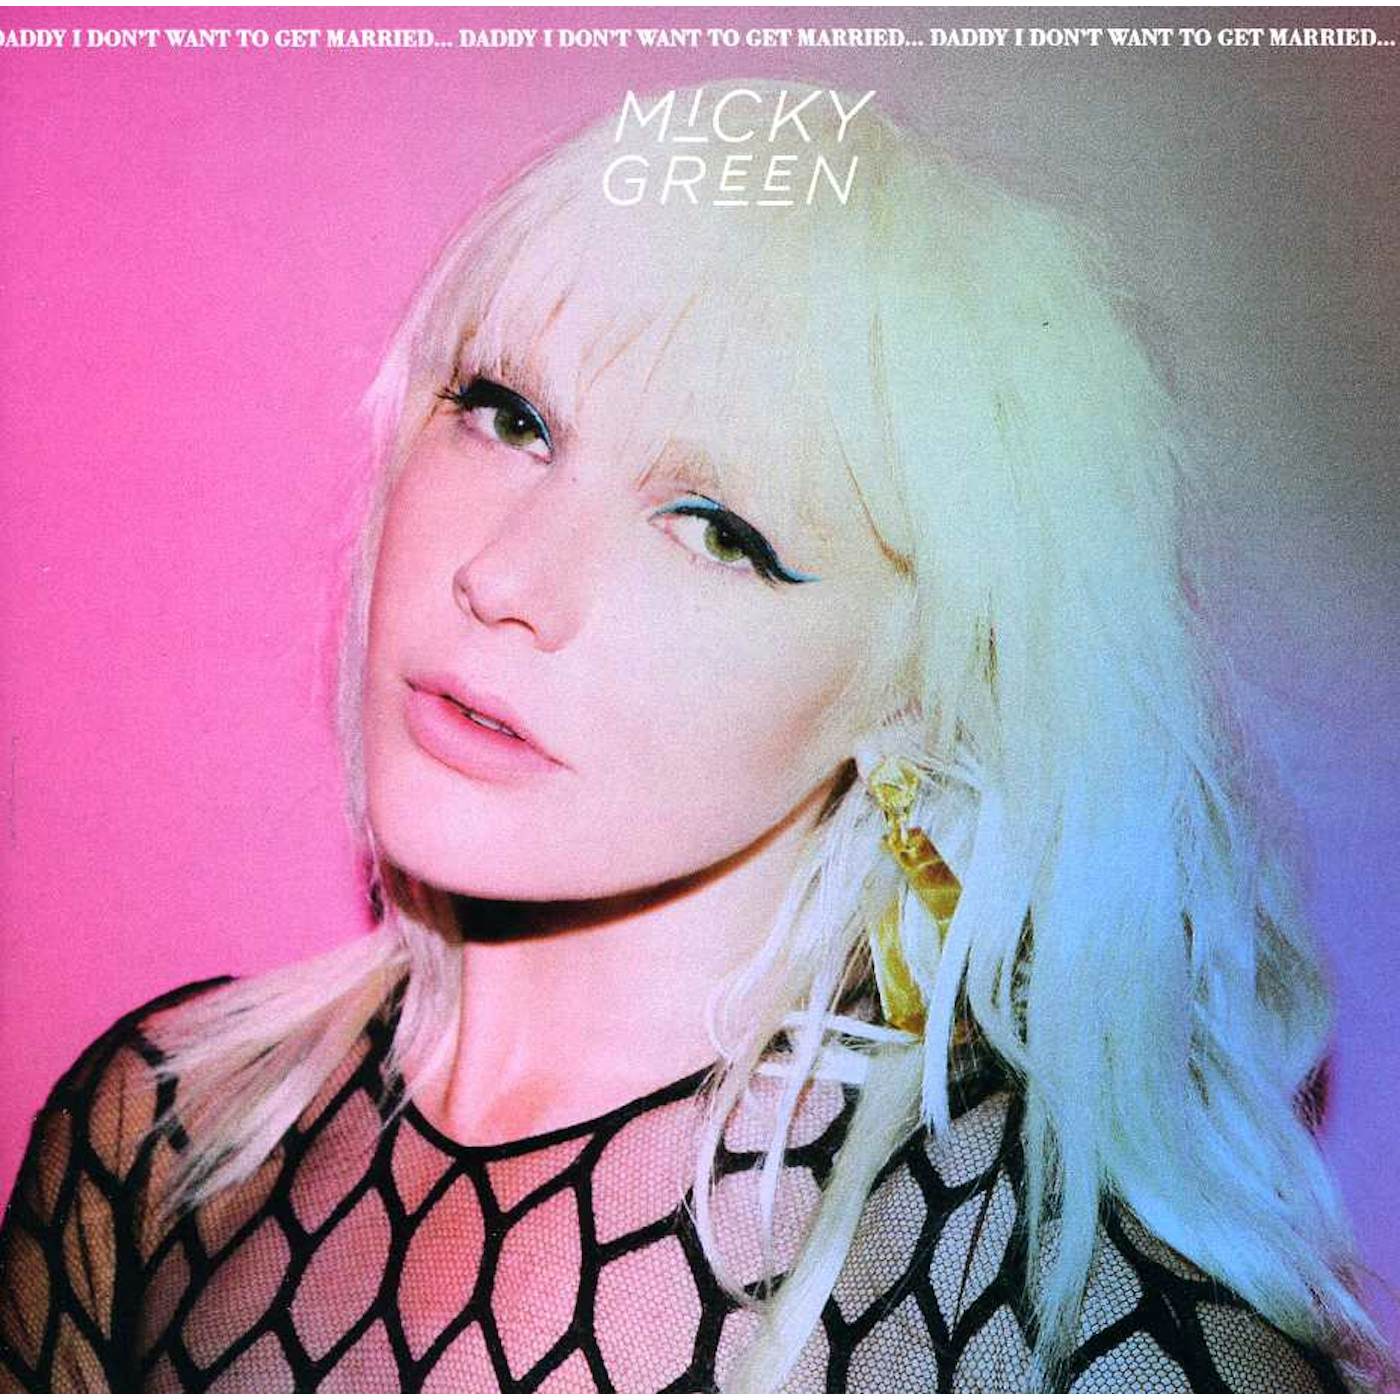 Micky Green DADDY I DON'T WANT TO GET MARRIED CD